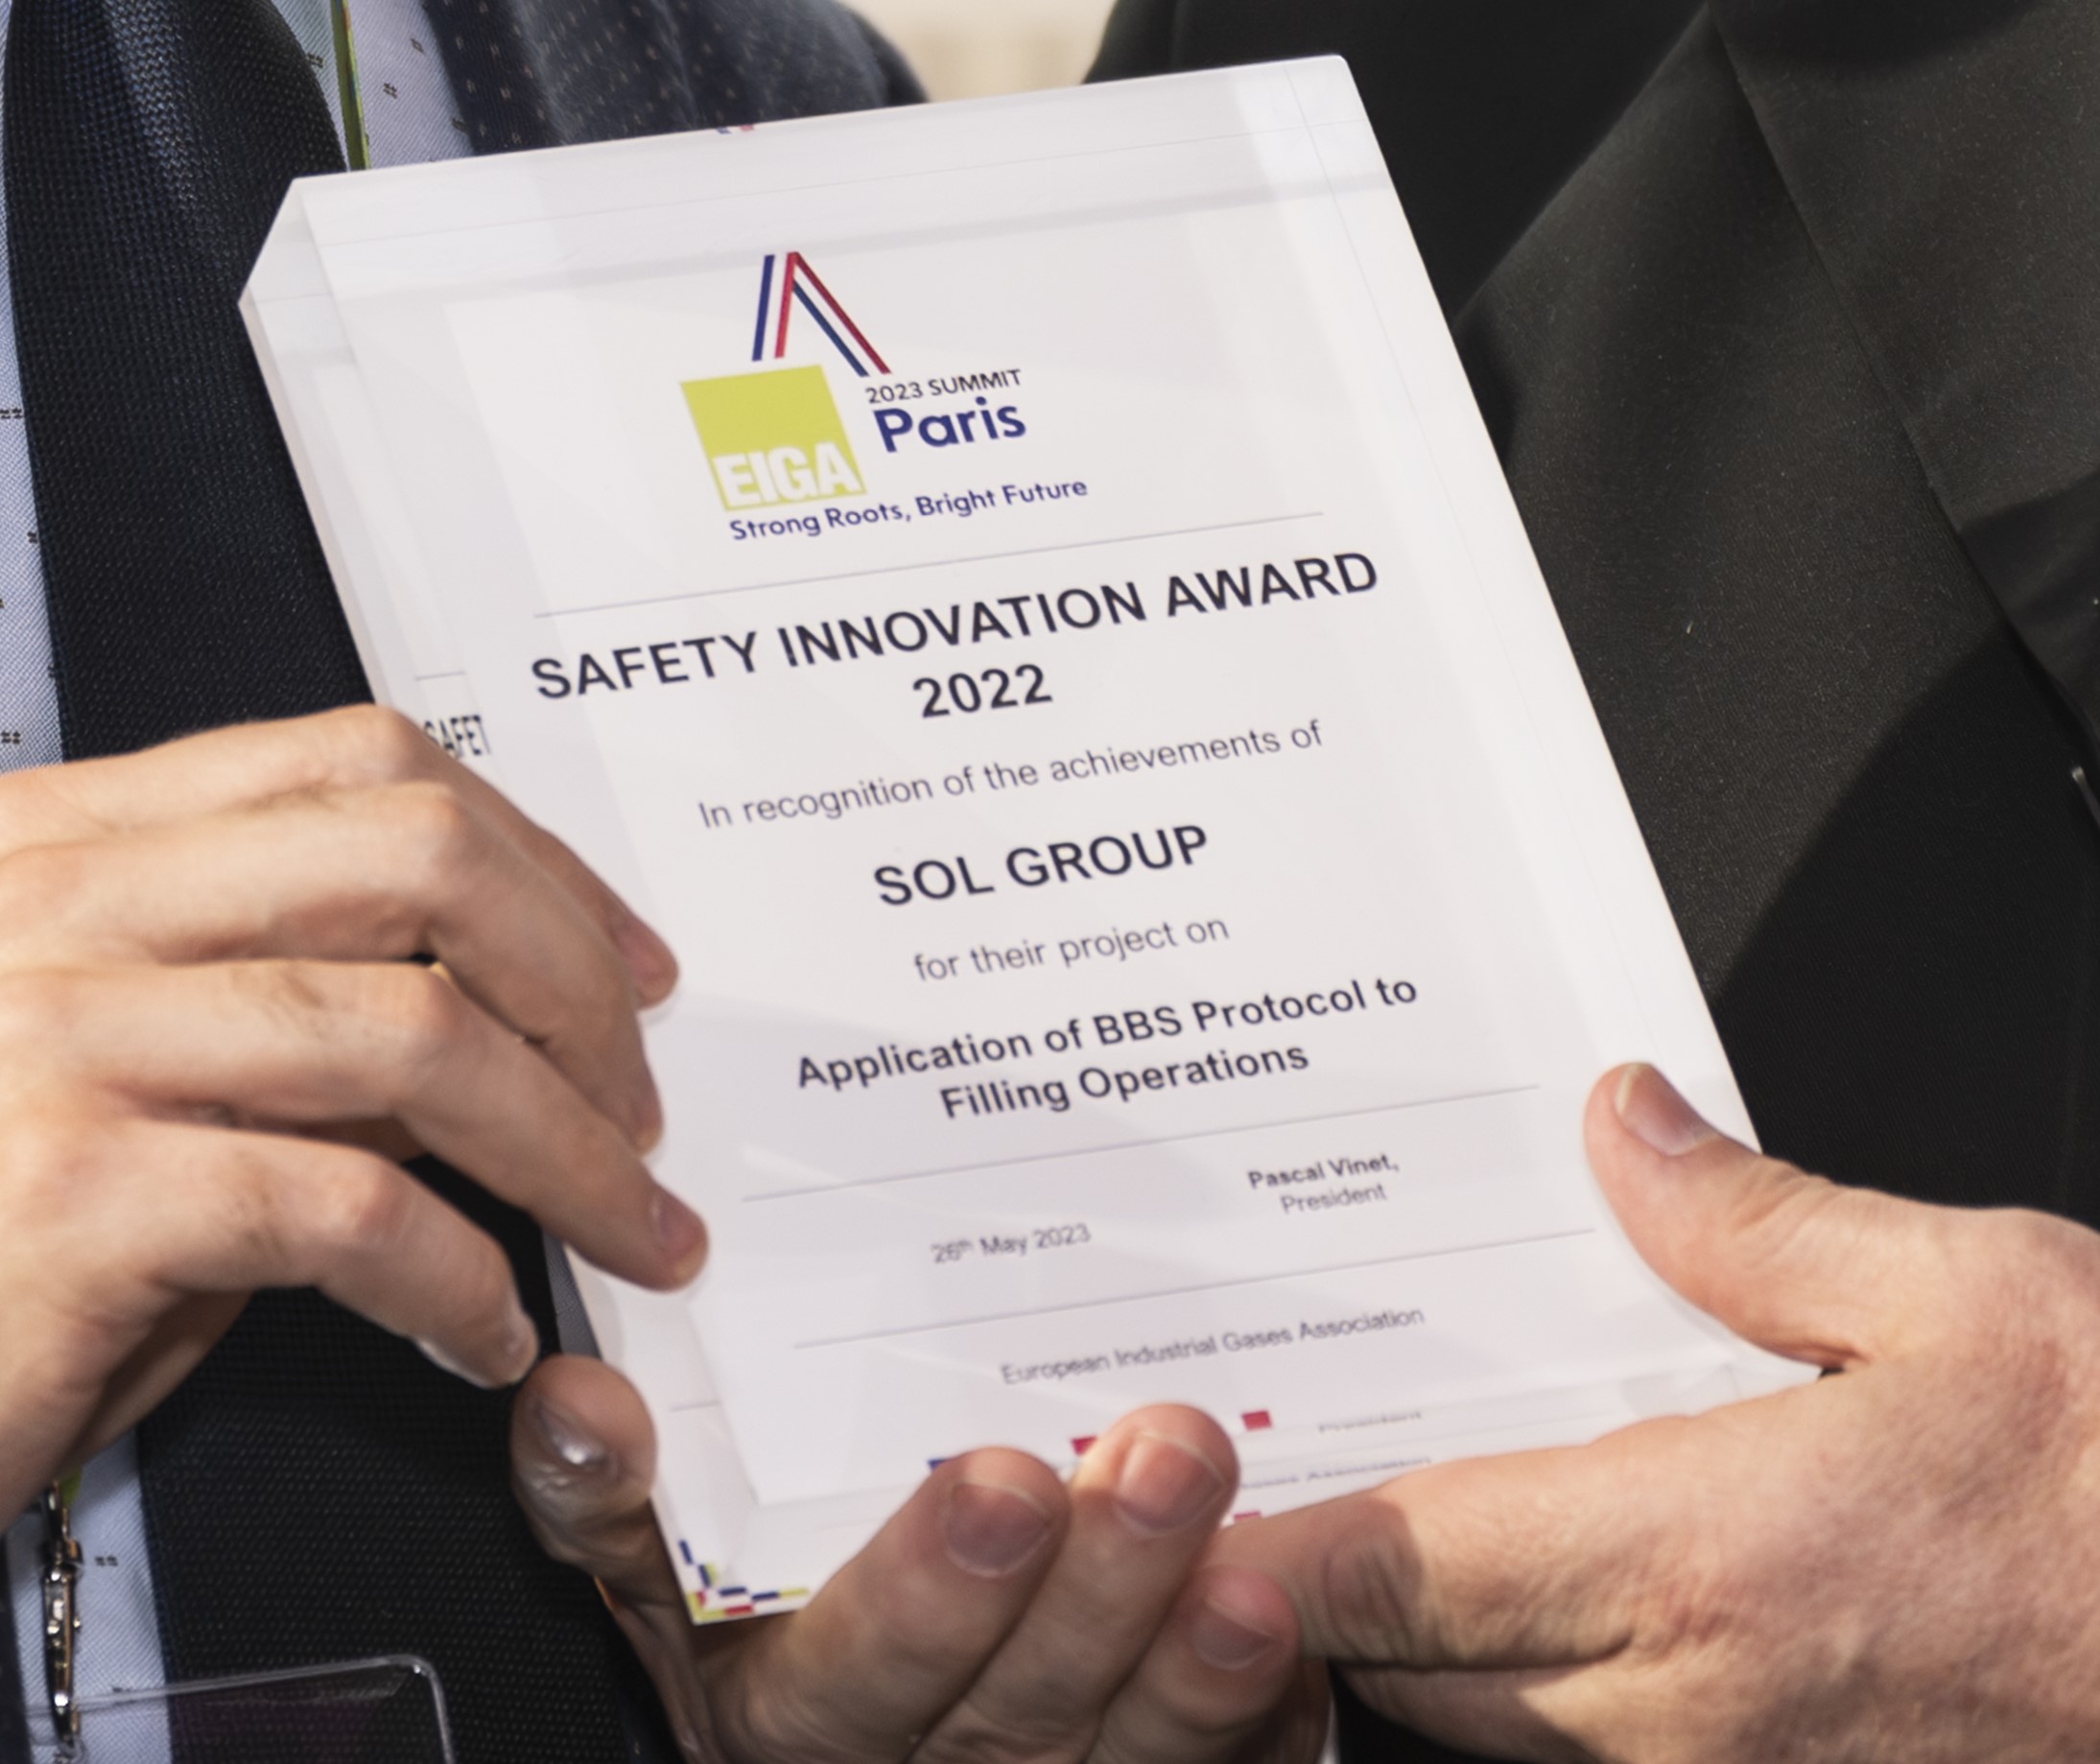 Call for Safety Innovation Award 2023 is now open! "mechanical